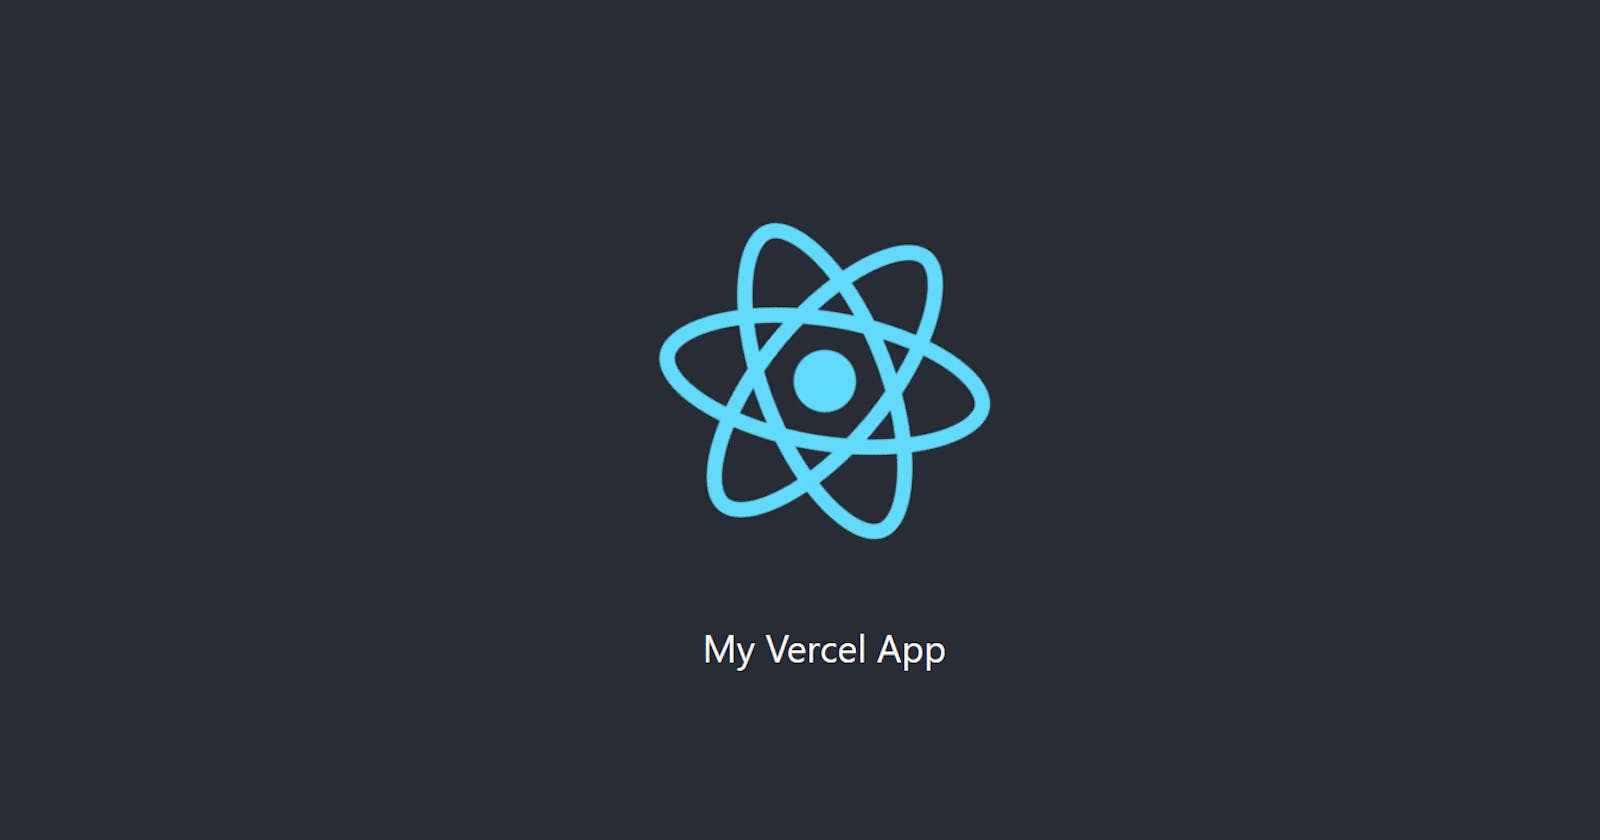 How to Build and Deploy React App on Vercel